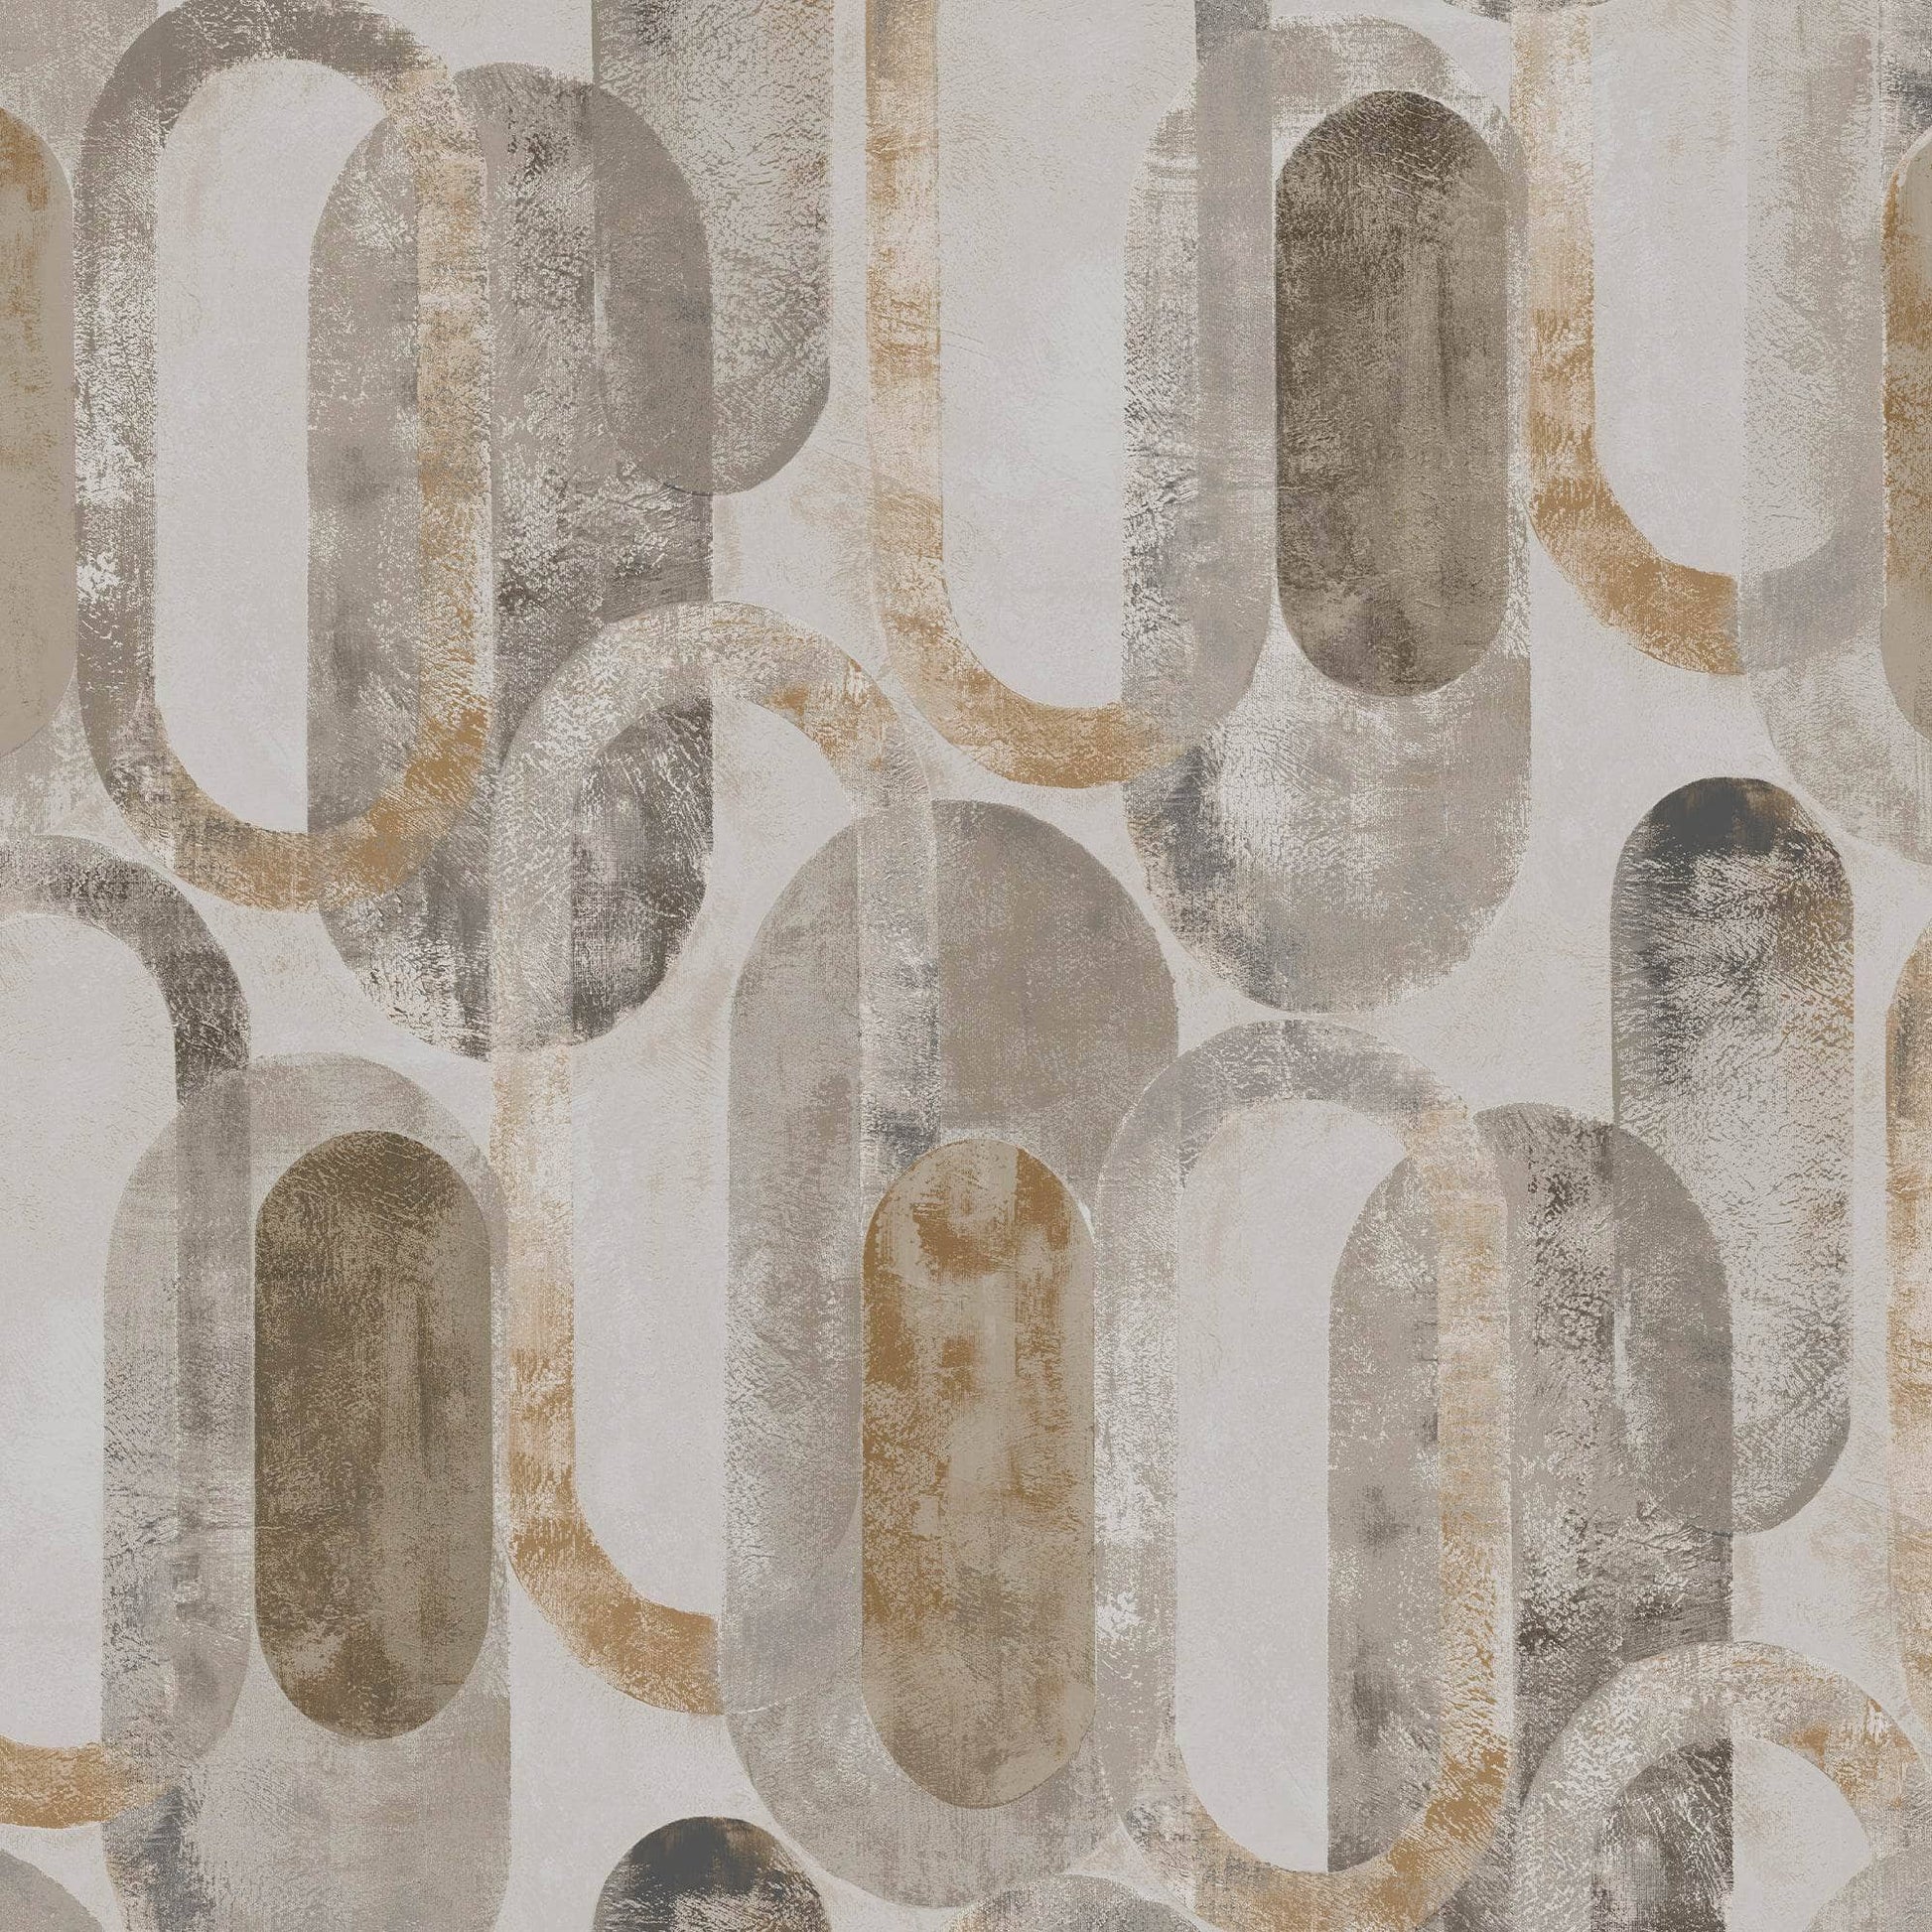 Wallpaper -  G&B Sublime Oval Shapes Sand & Grey - 121137  -  60009412